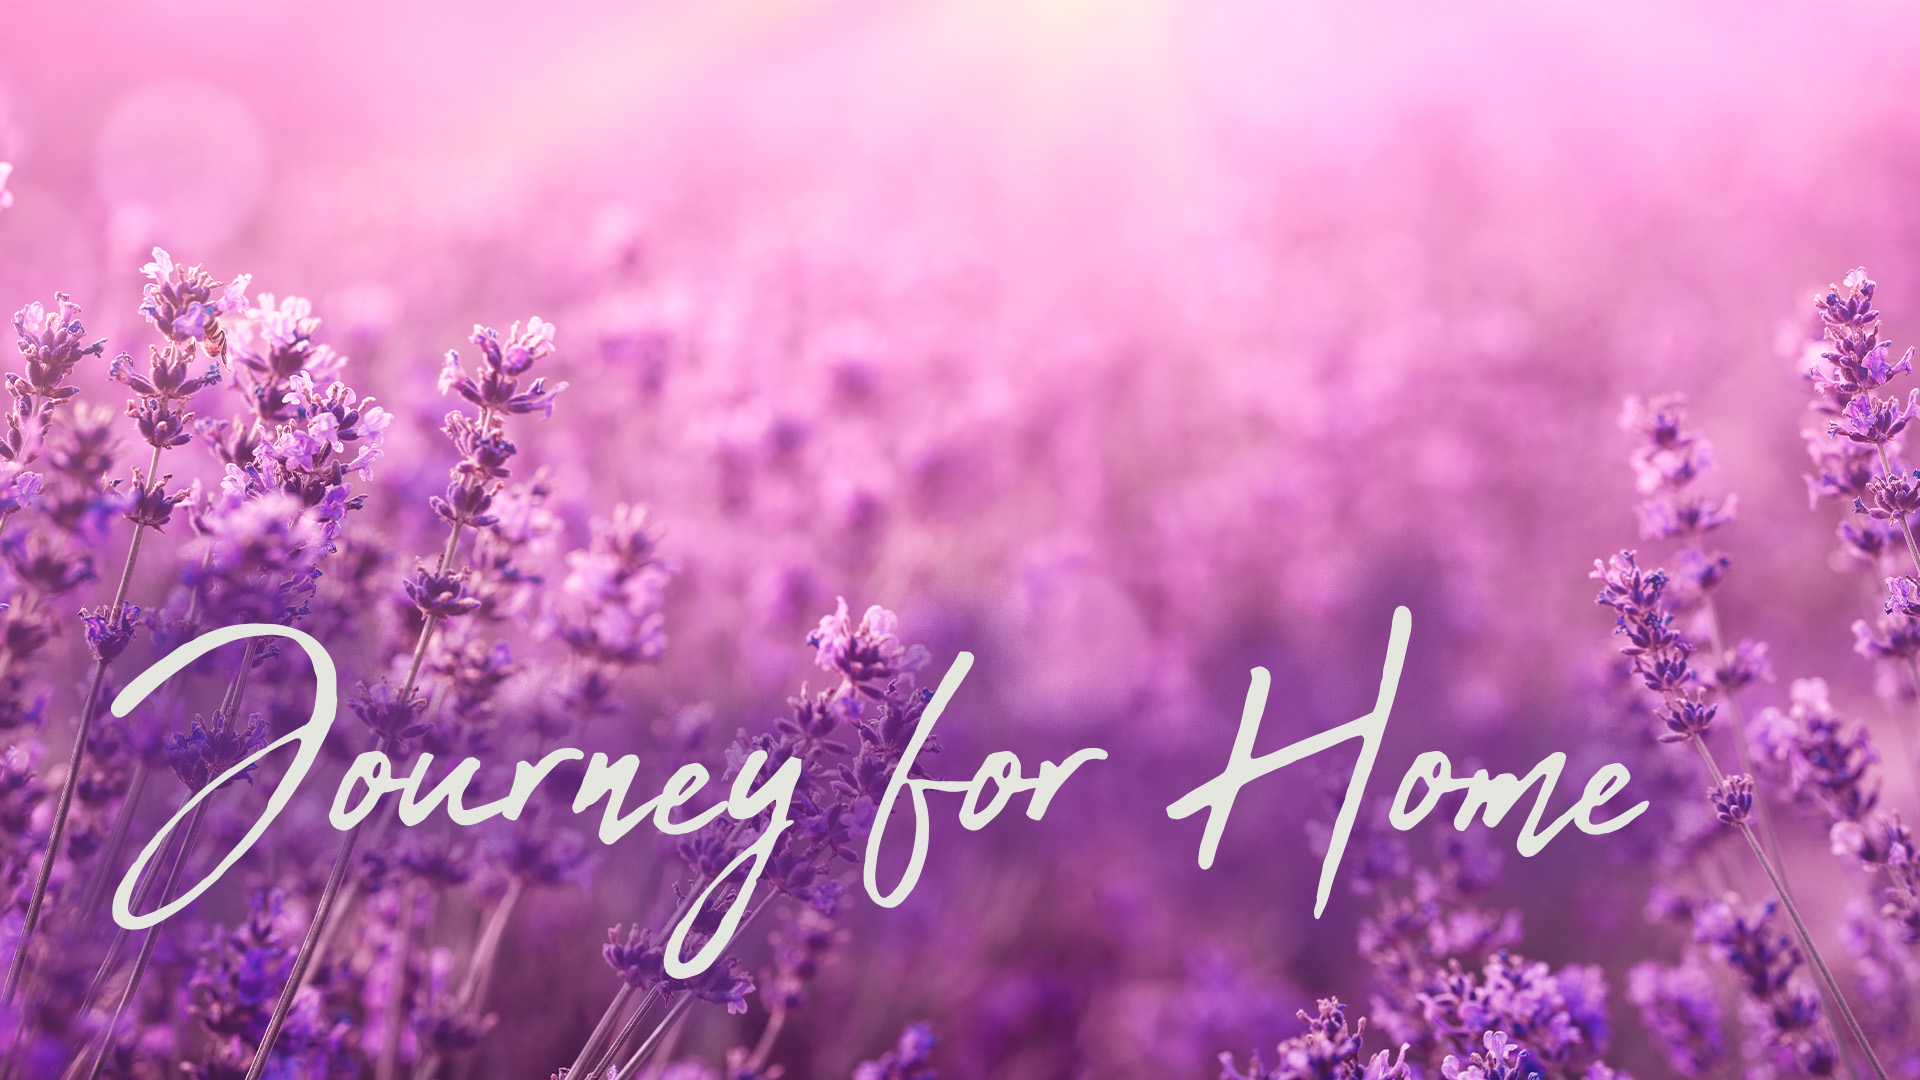 Journey Home Overall Theme